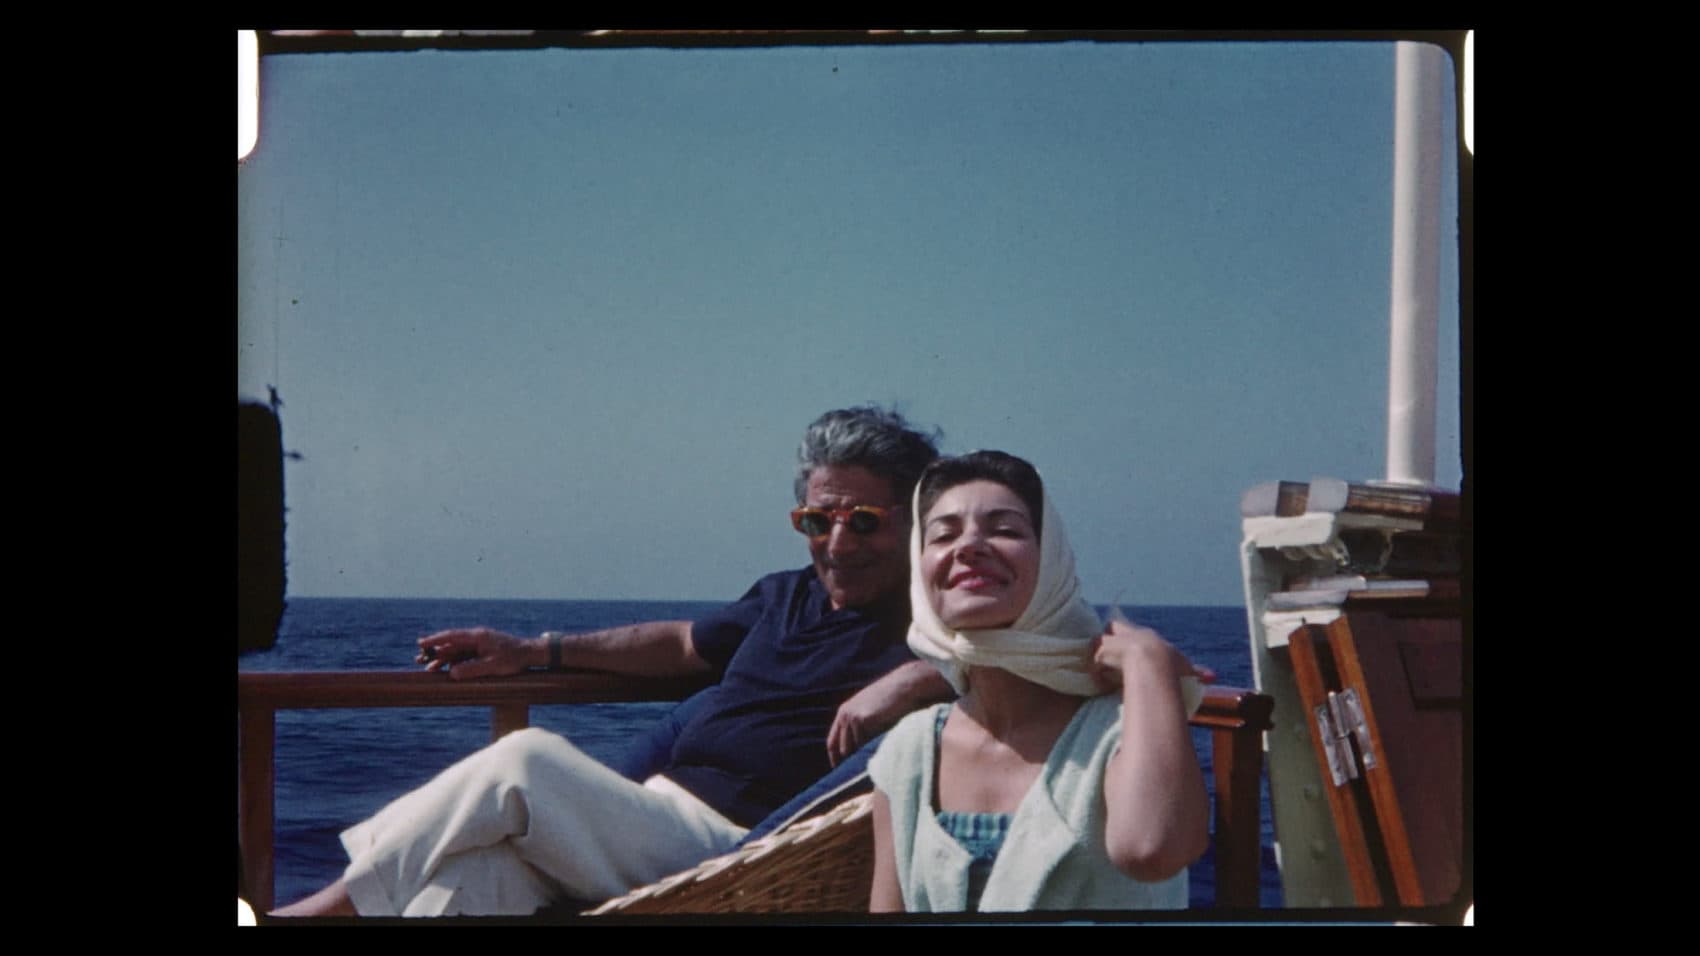 Aristotle Onassis, left, with Maria Callas. The two carried on a love affair that received much publicity. (Sony Pictures Classics/Sony Pictures)